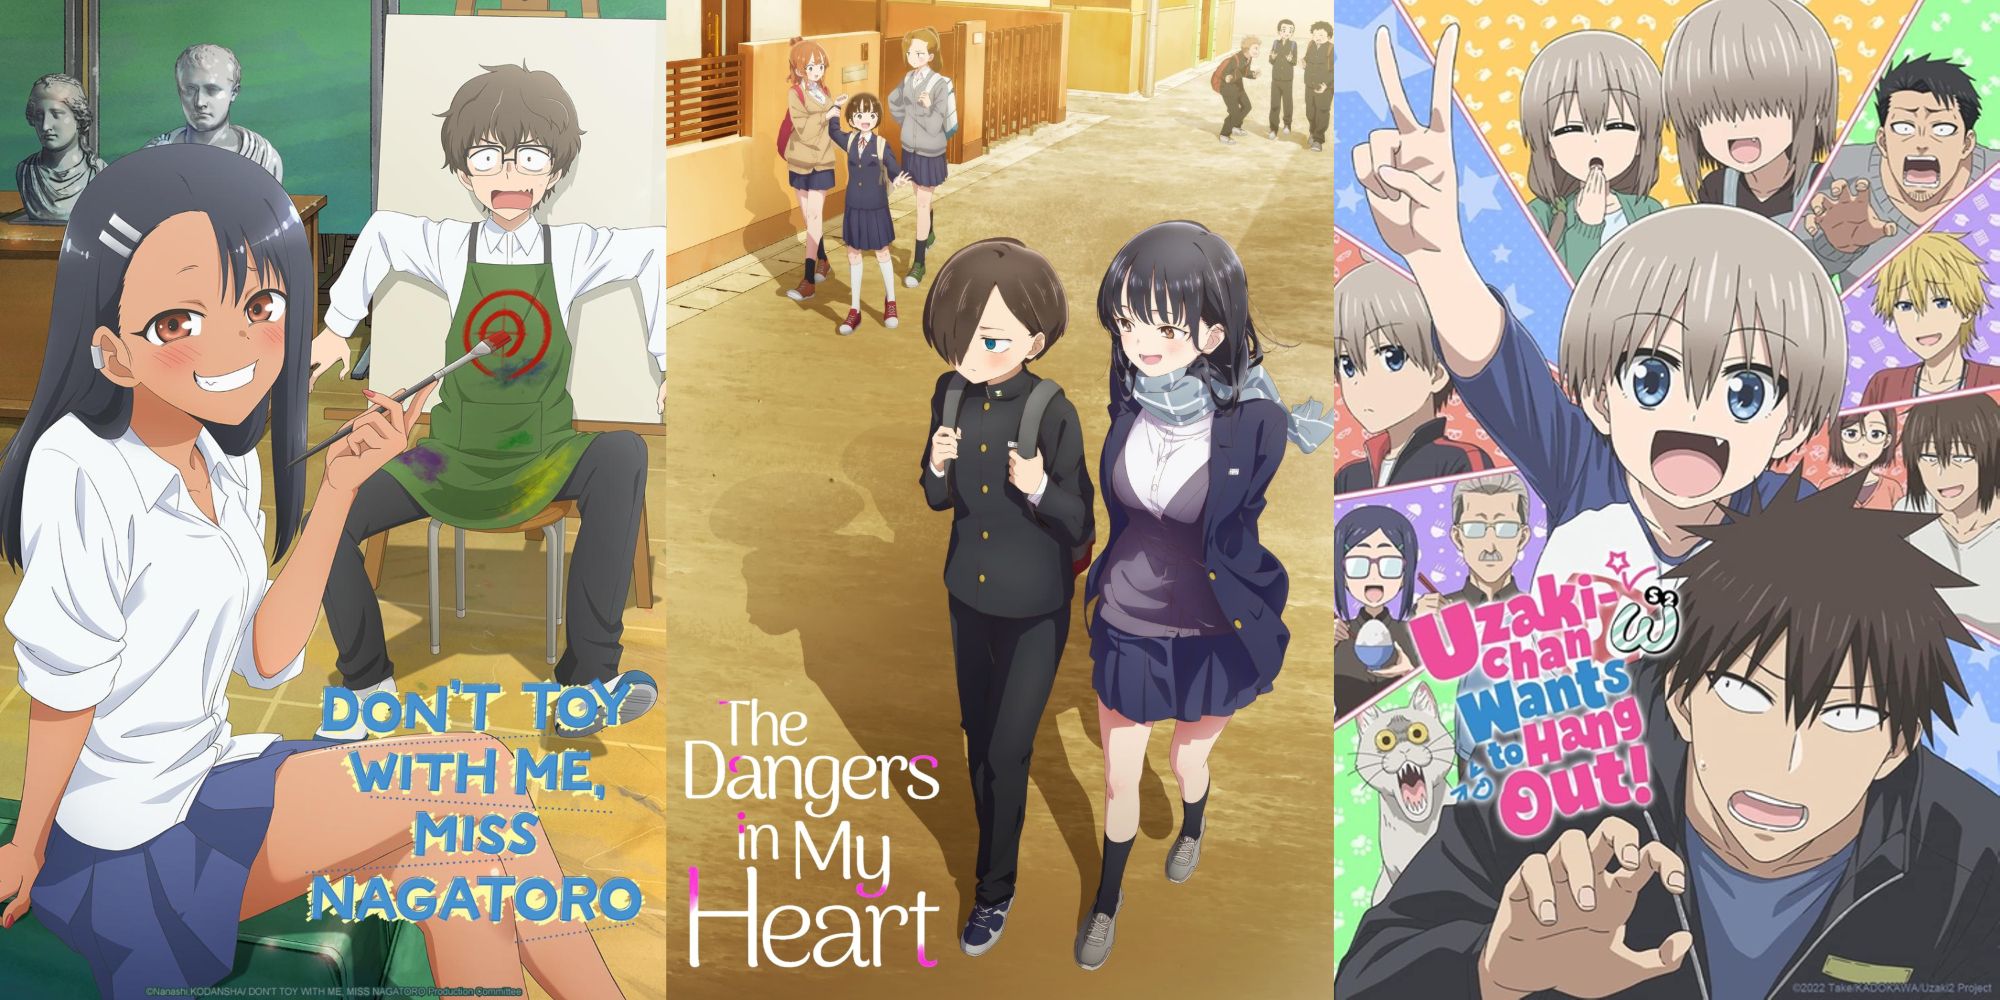 The Dangers in My Heart – Mangás Chan